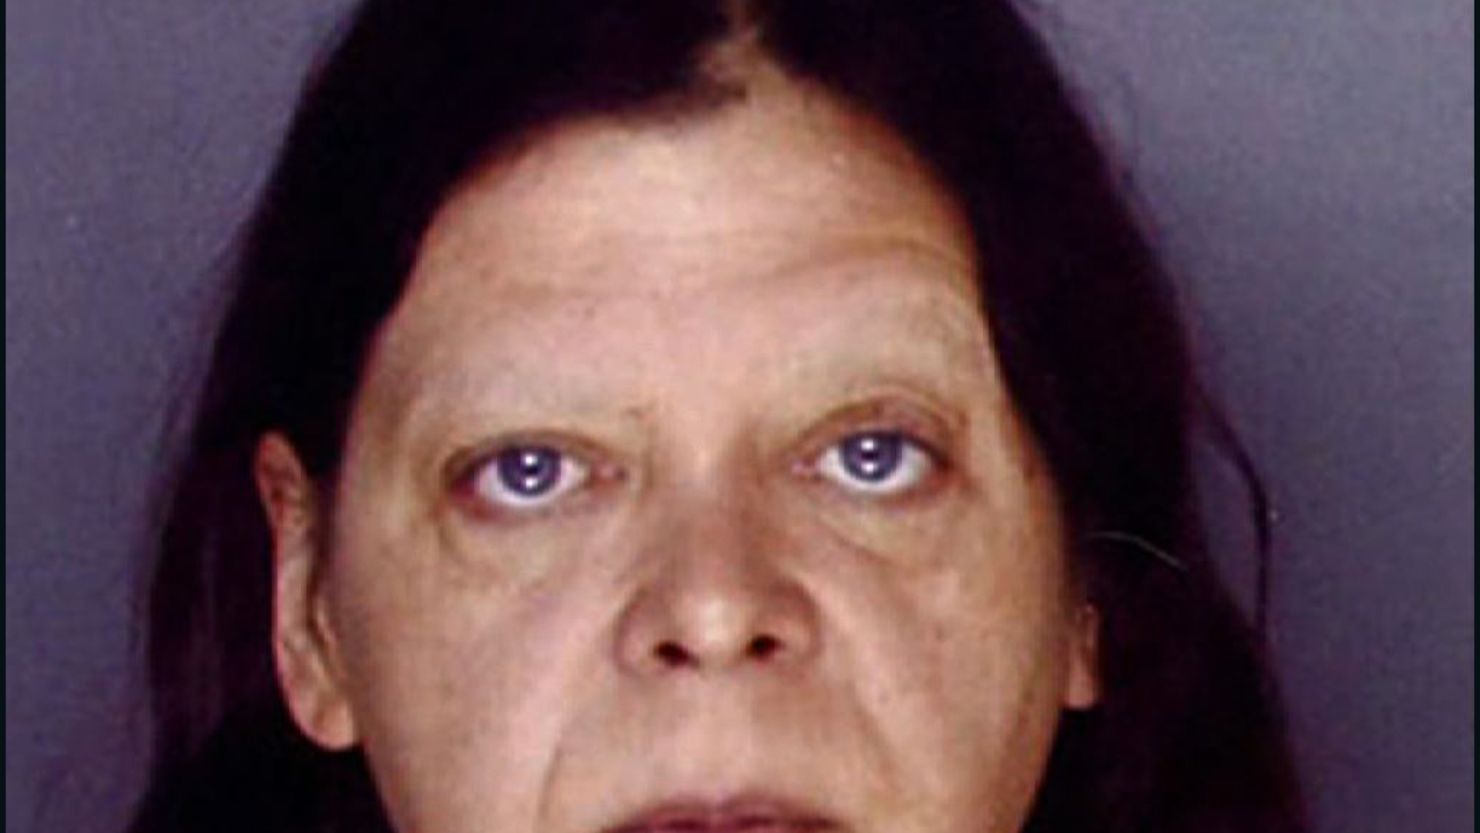 Marjorie Diehl-Armstrong received a 30-year prison sentence in 2011.